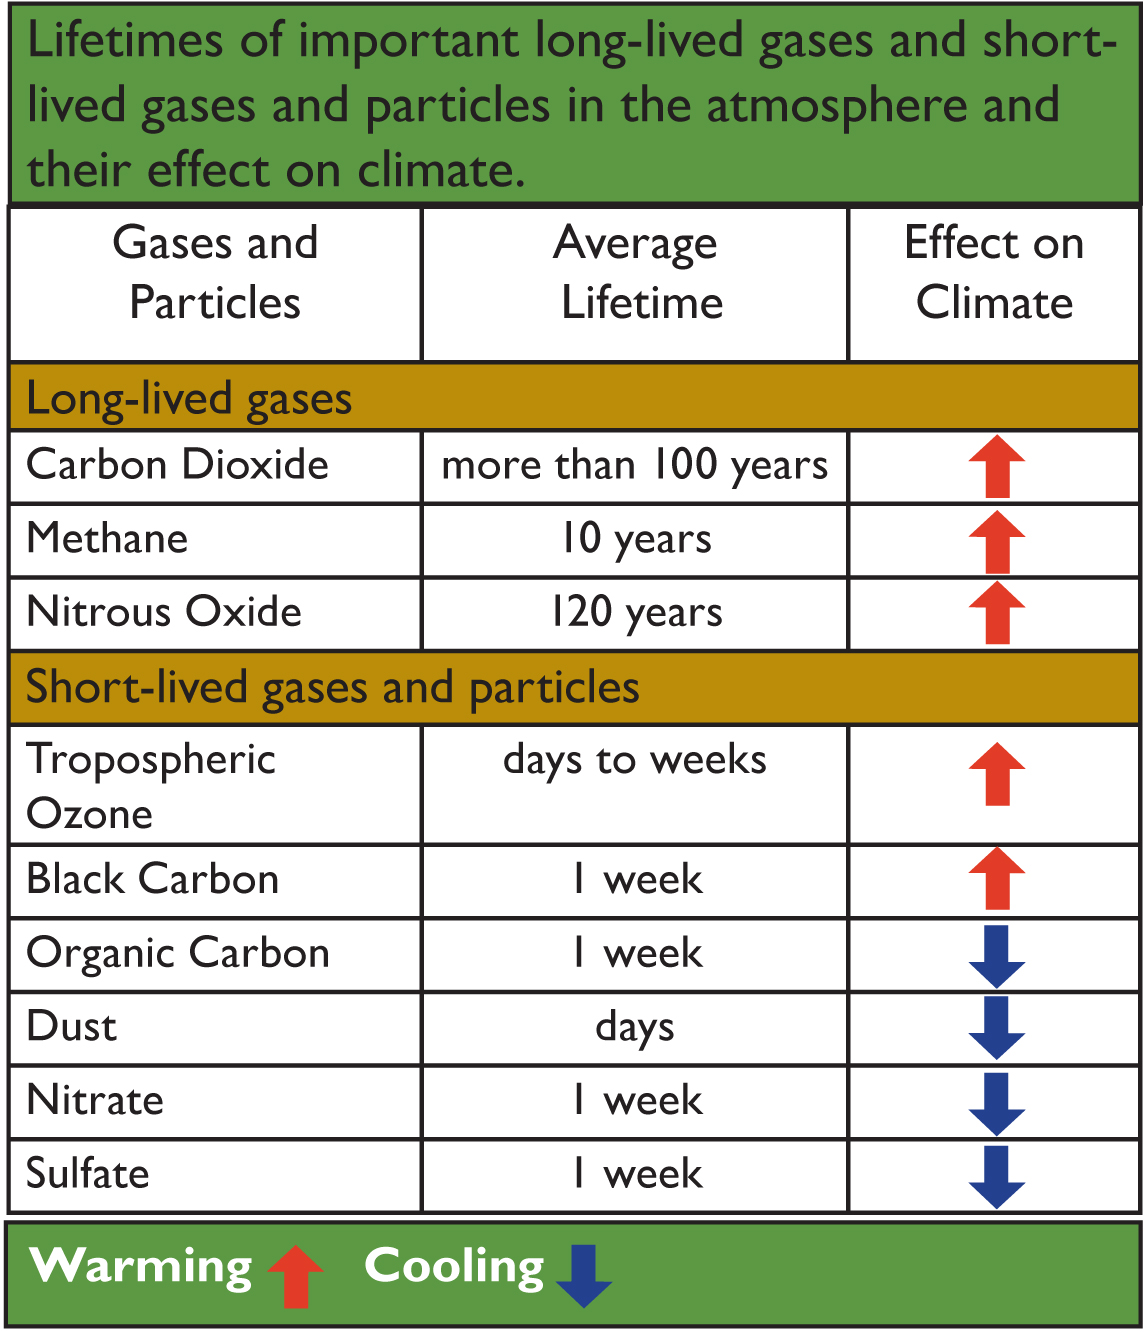 Lifetimes of important Long-lived gasses and Short-live gases and particles in the atmosphere and their effect on climate 